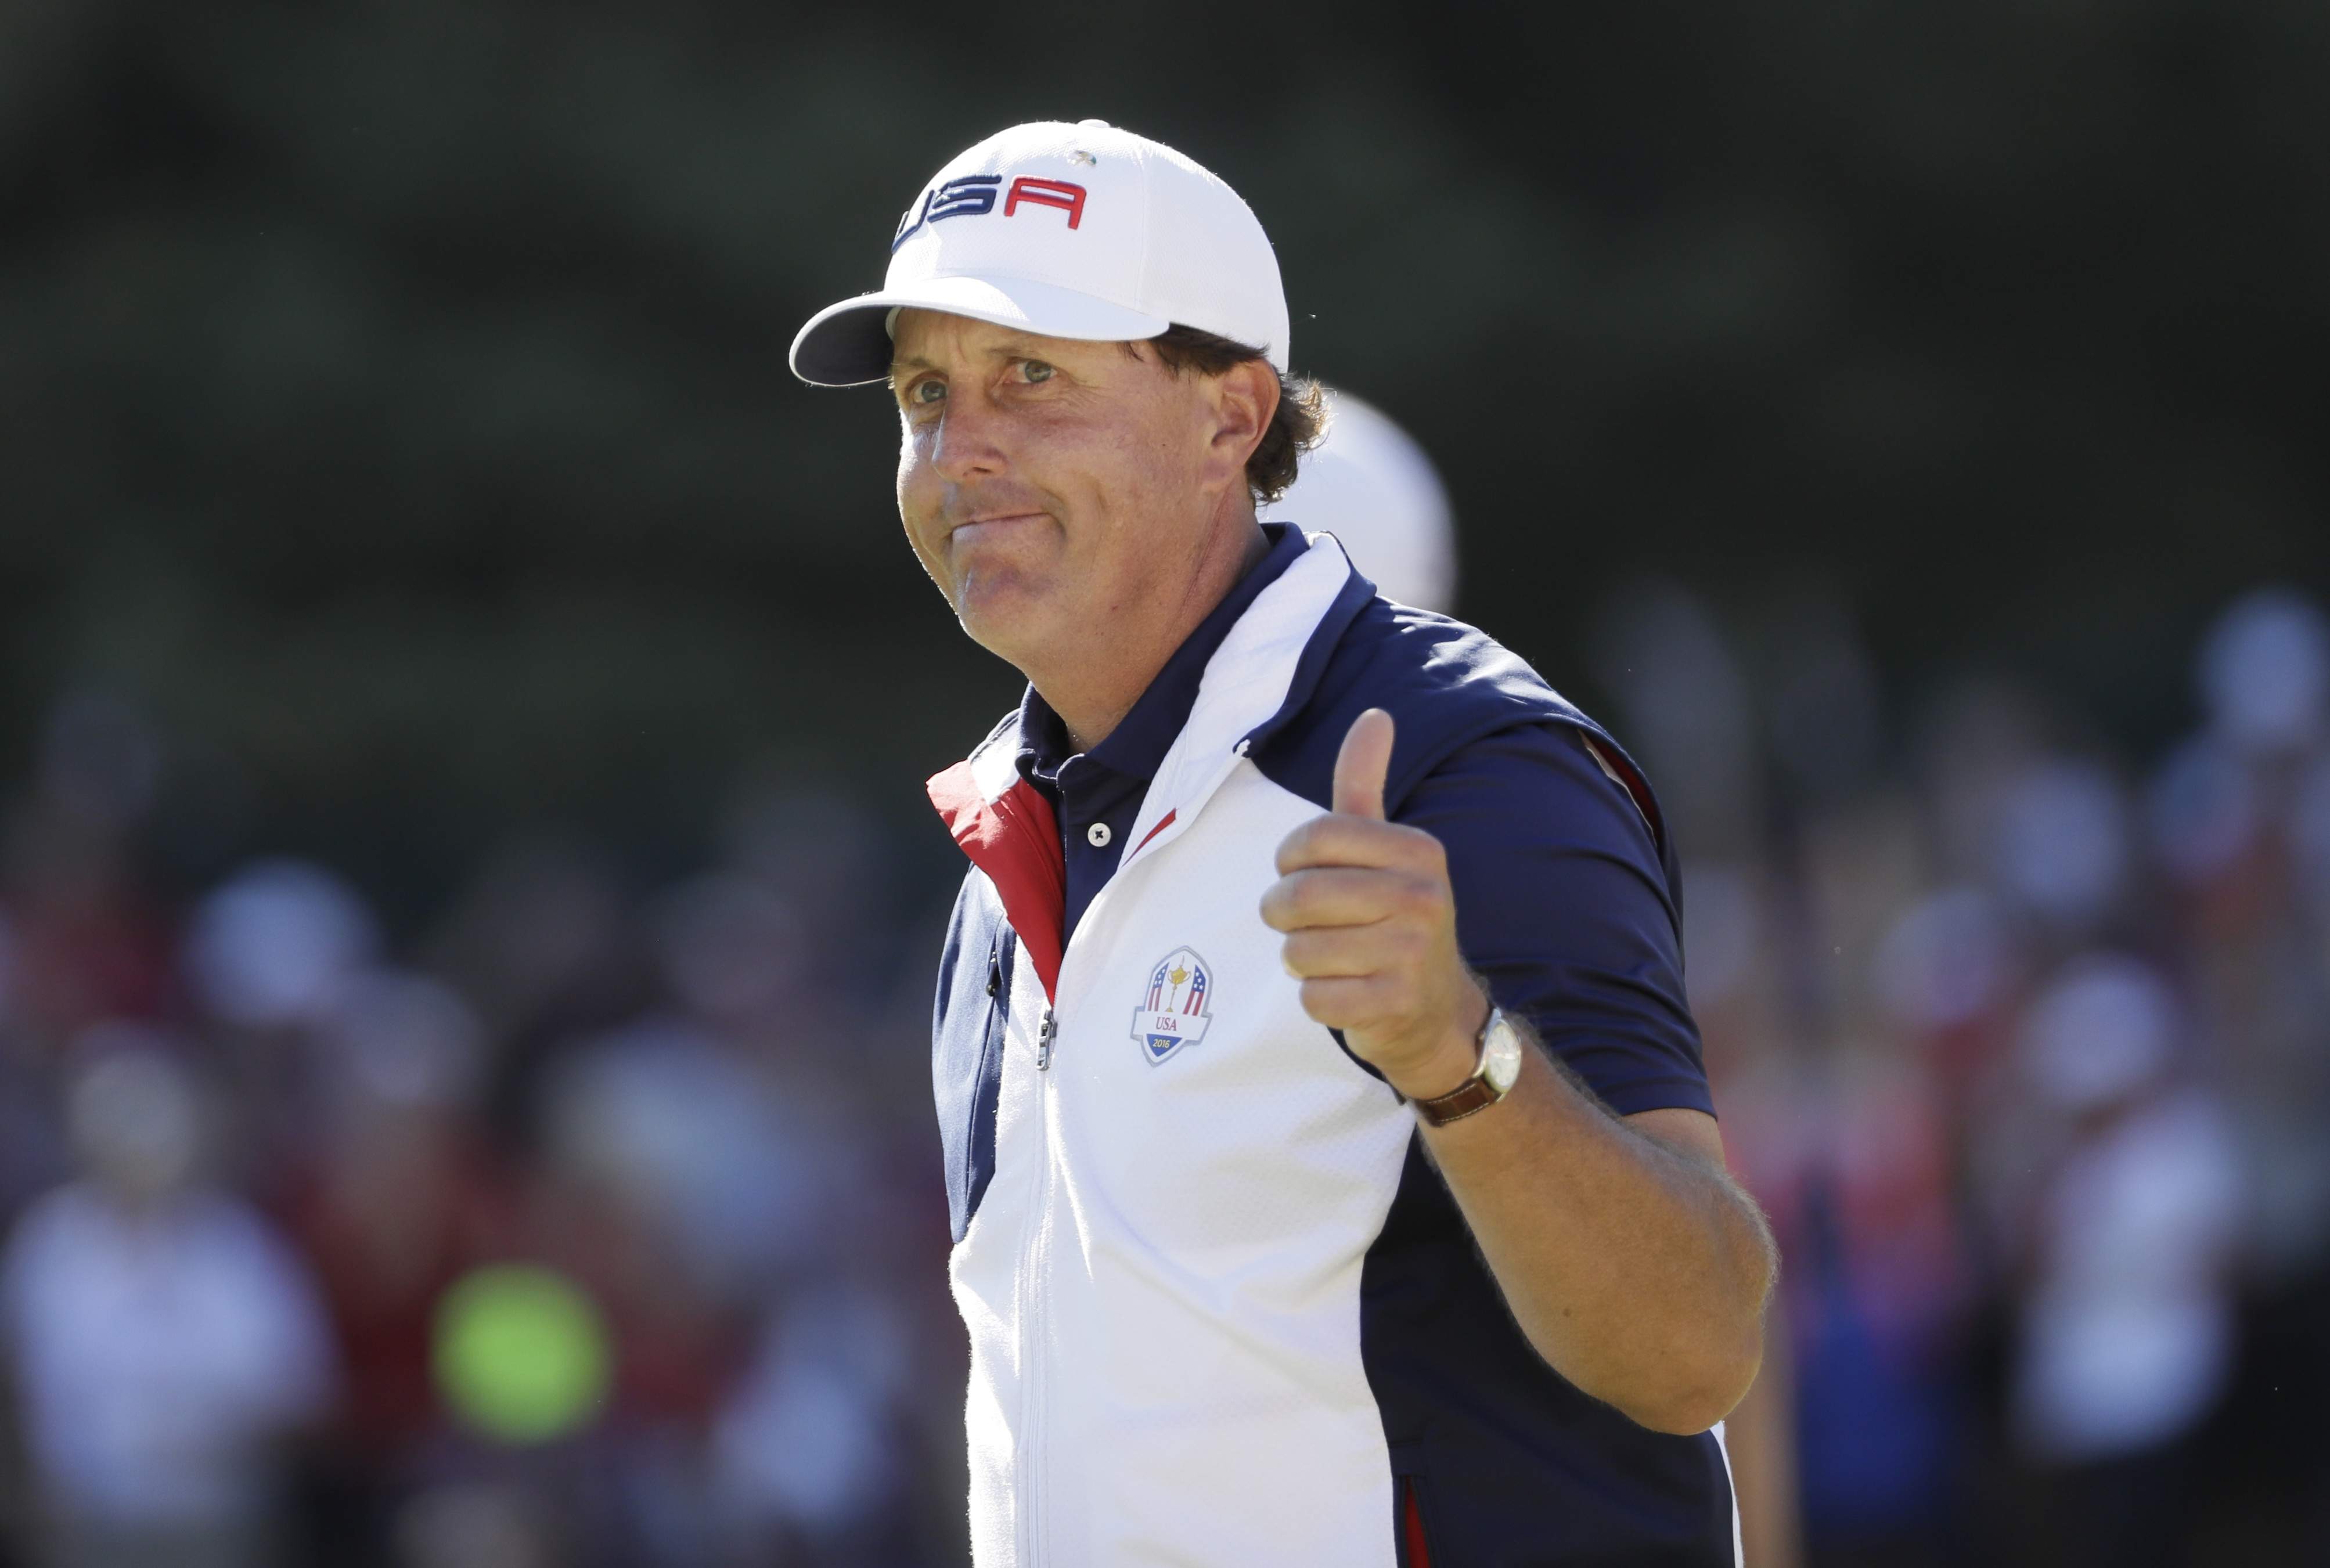 Lefty Stands By Tiger And Picks Up The Broken Pieces At Safeway